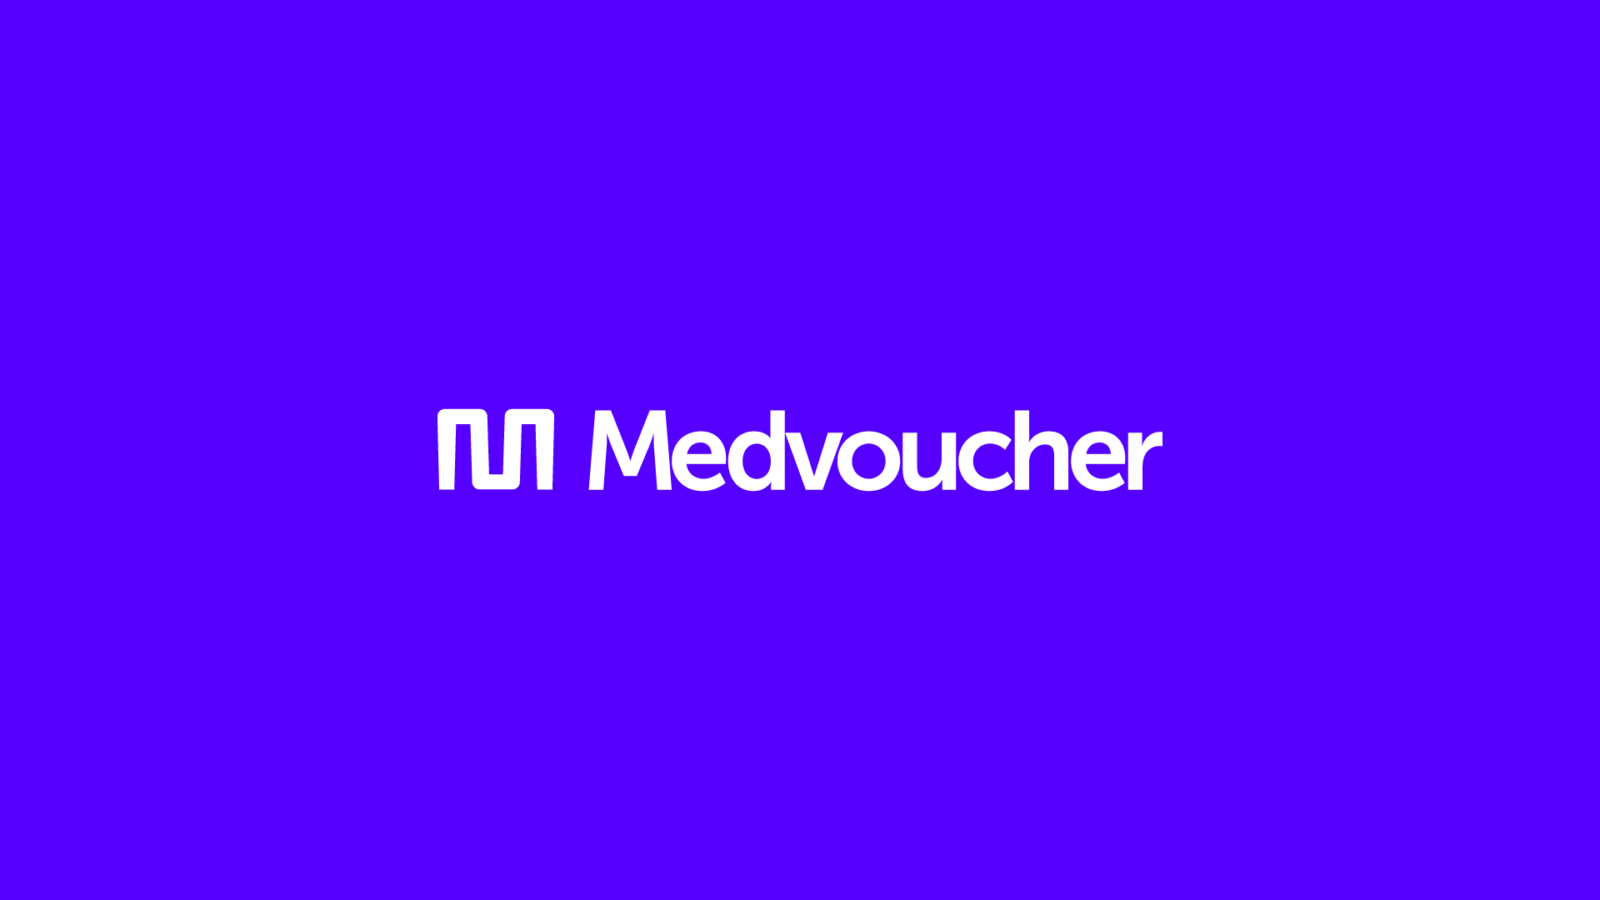 Brand identity logo and strategy for Medvoucher, a healthcare marketplace app